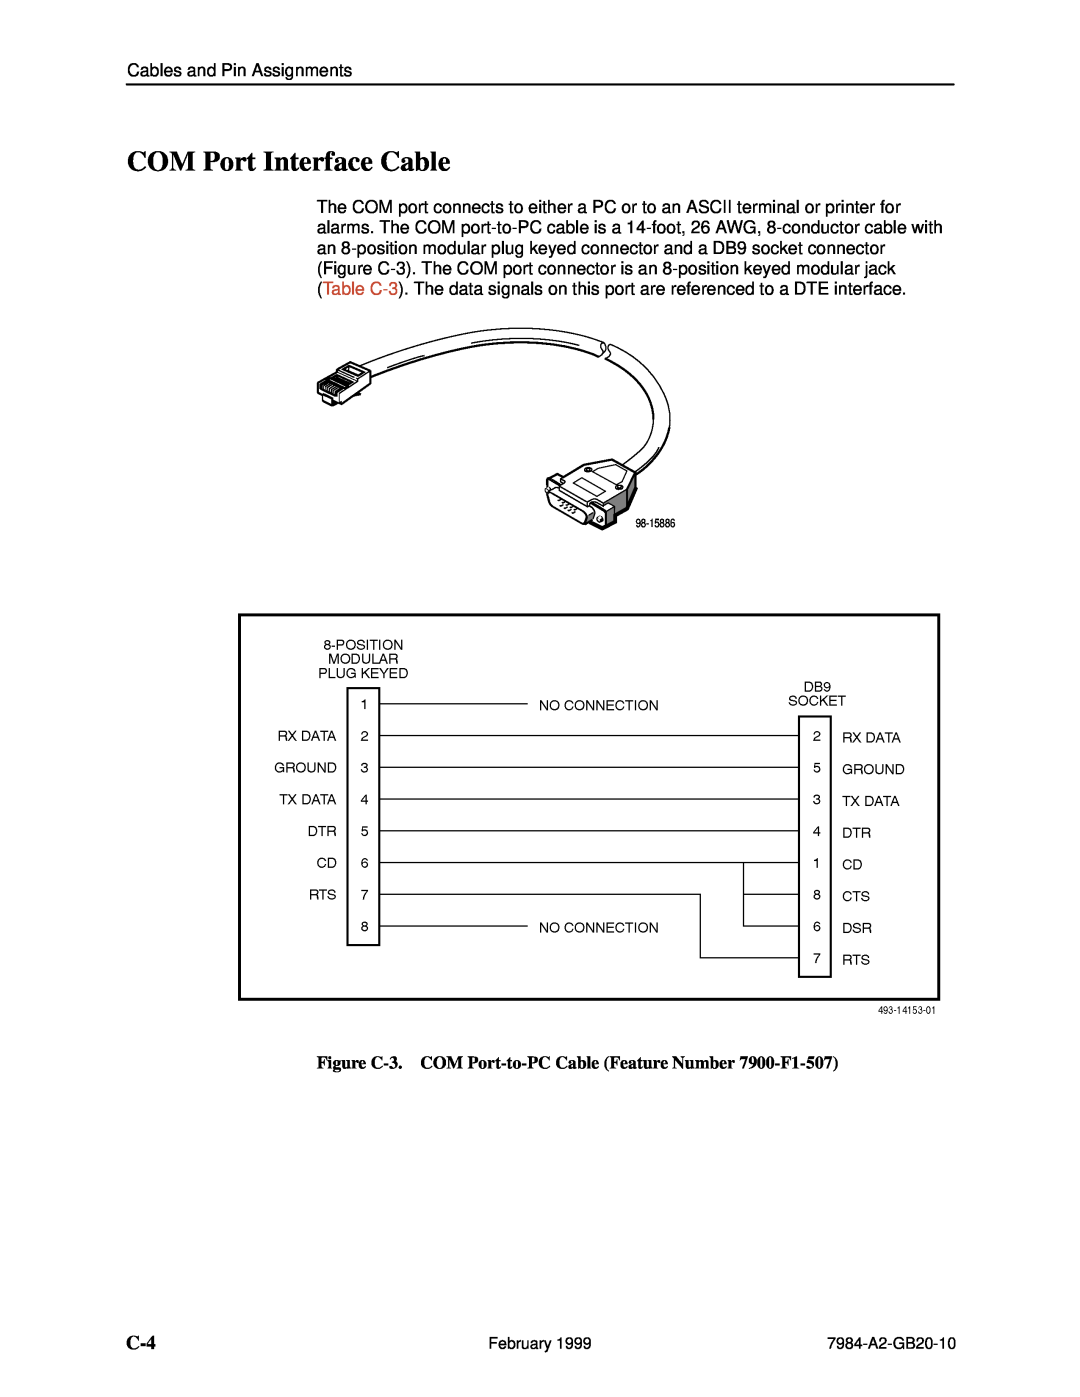 Paradyne Hotwire 7984 manual COM Port Interface Cable, Figure C-3. COM Port-to-PC Cable Feature Number 7900-F1-507 